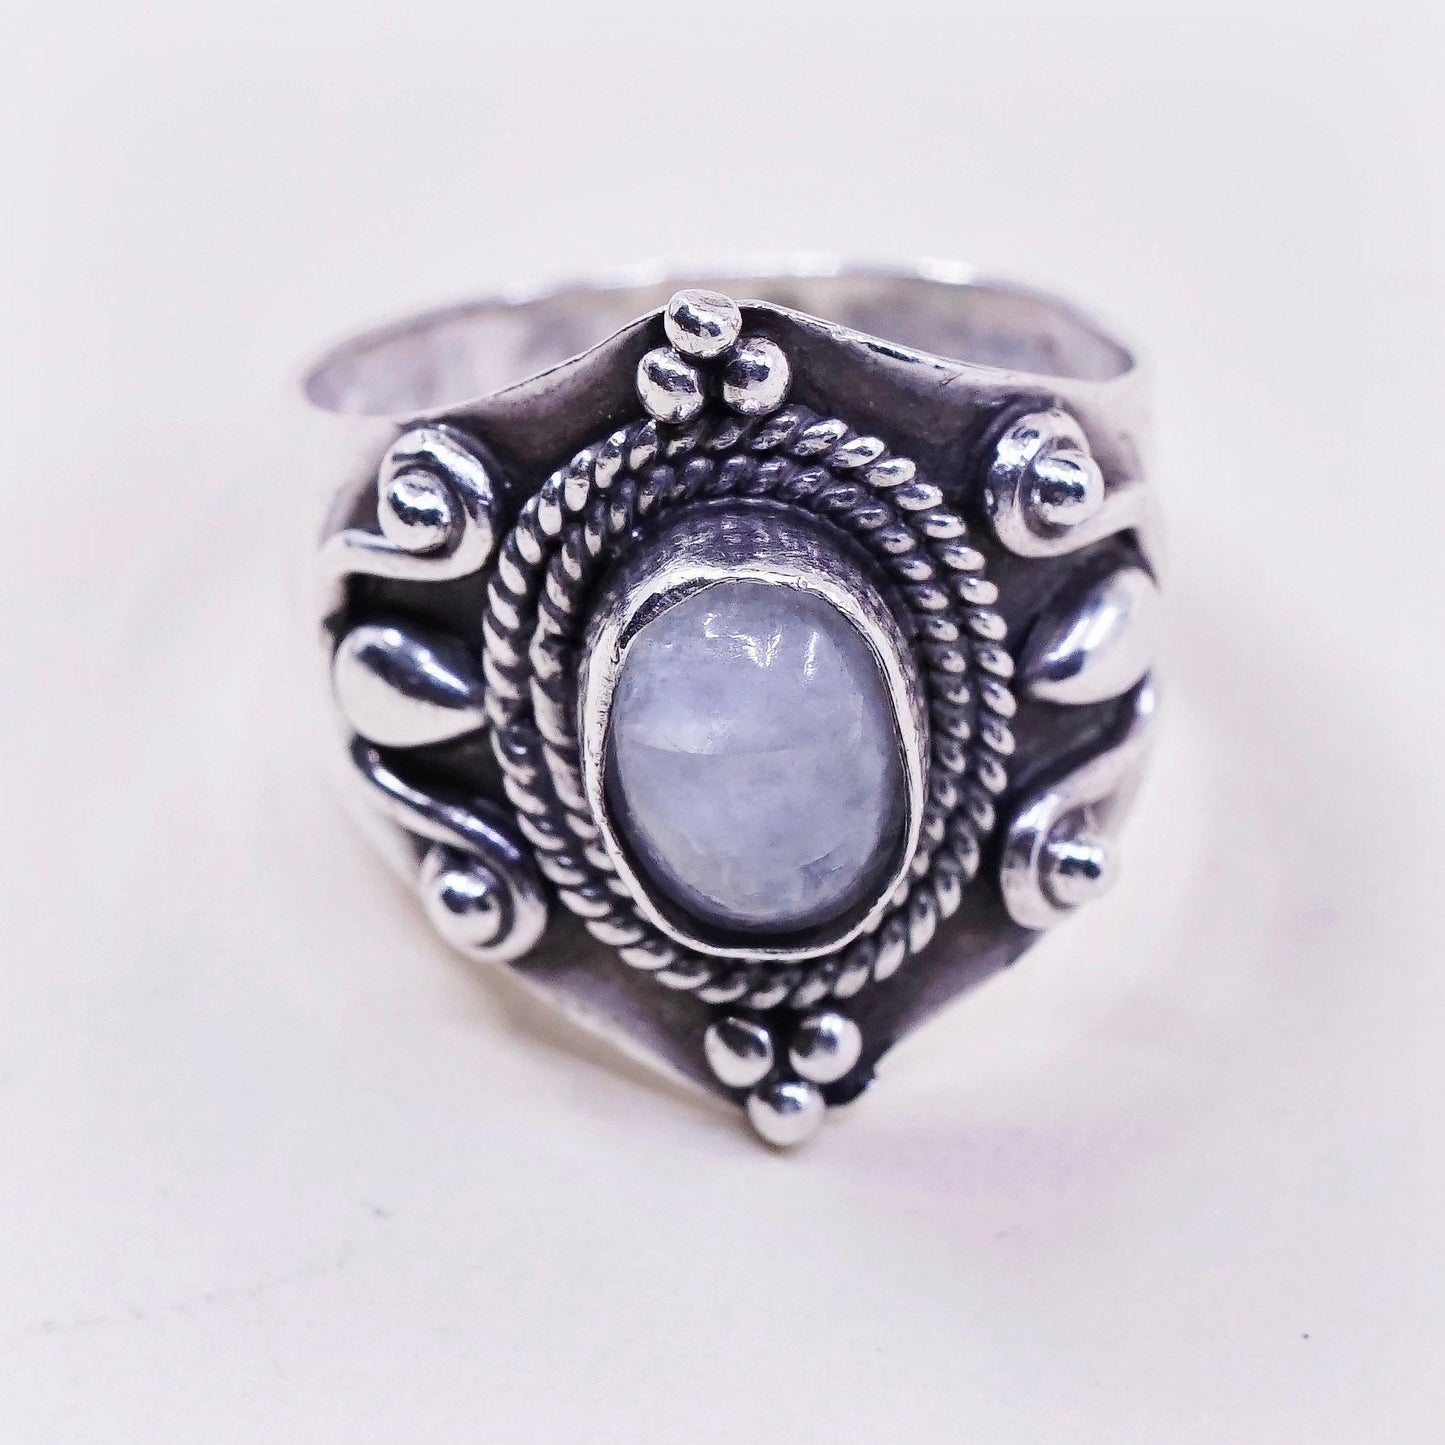 sz 8, vtg sterling silver handmade ring, 925 wide band w/ moonstone and beads